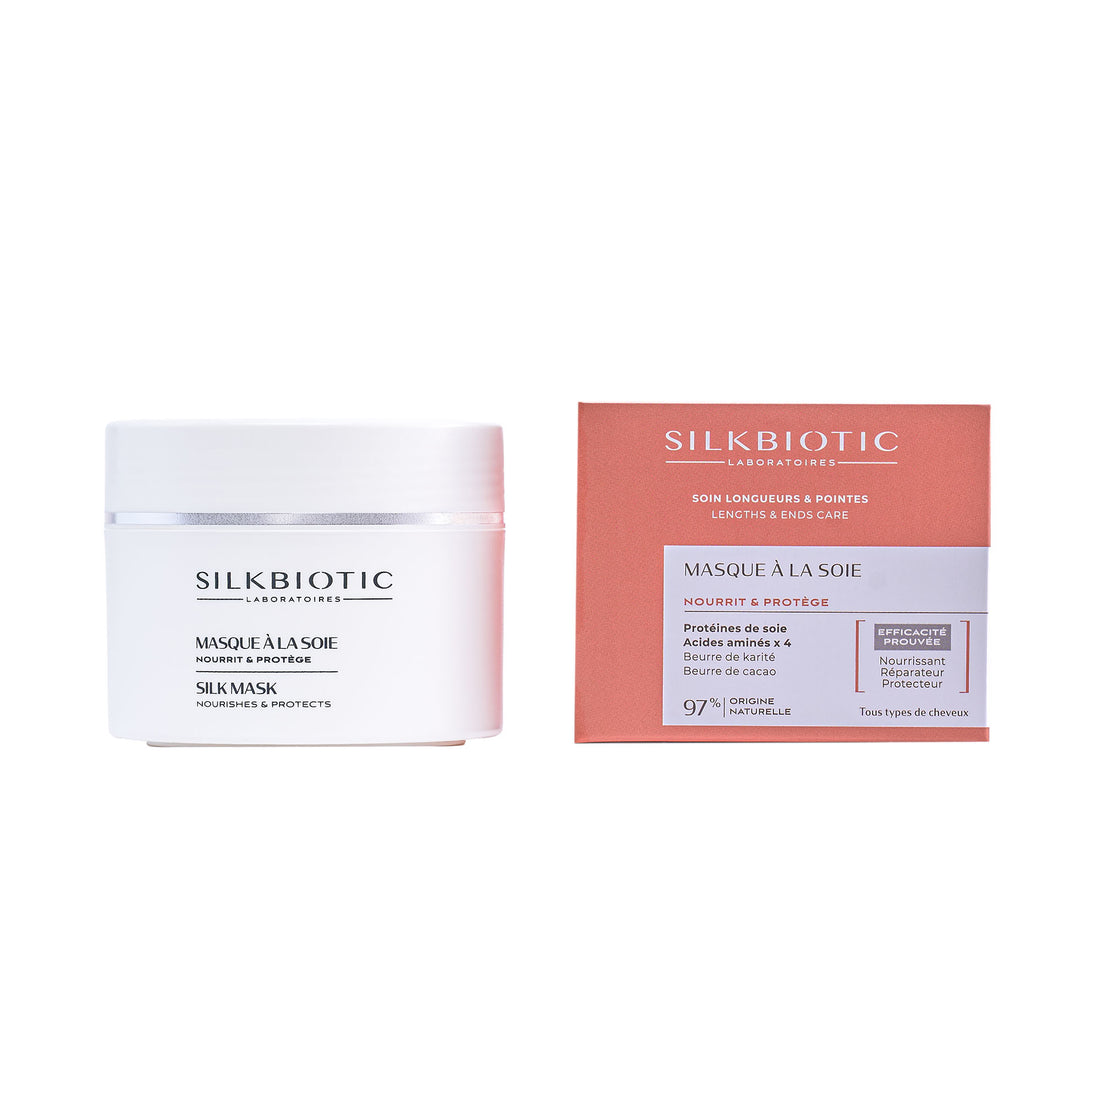 SILKBIOTIC Silk Mask - Lengths and ends care - 200ml